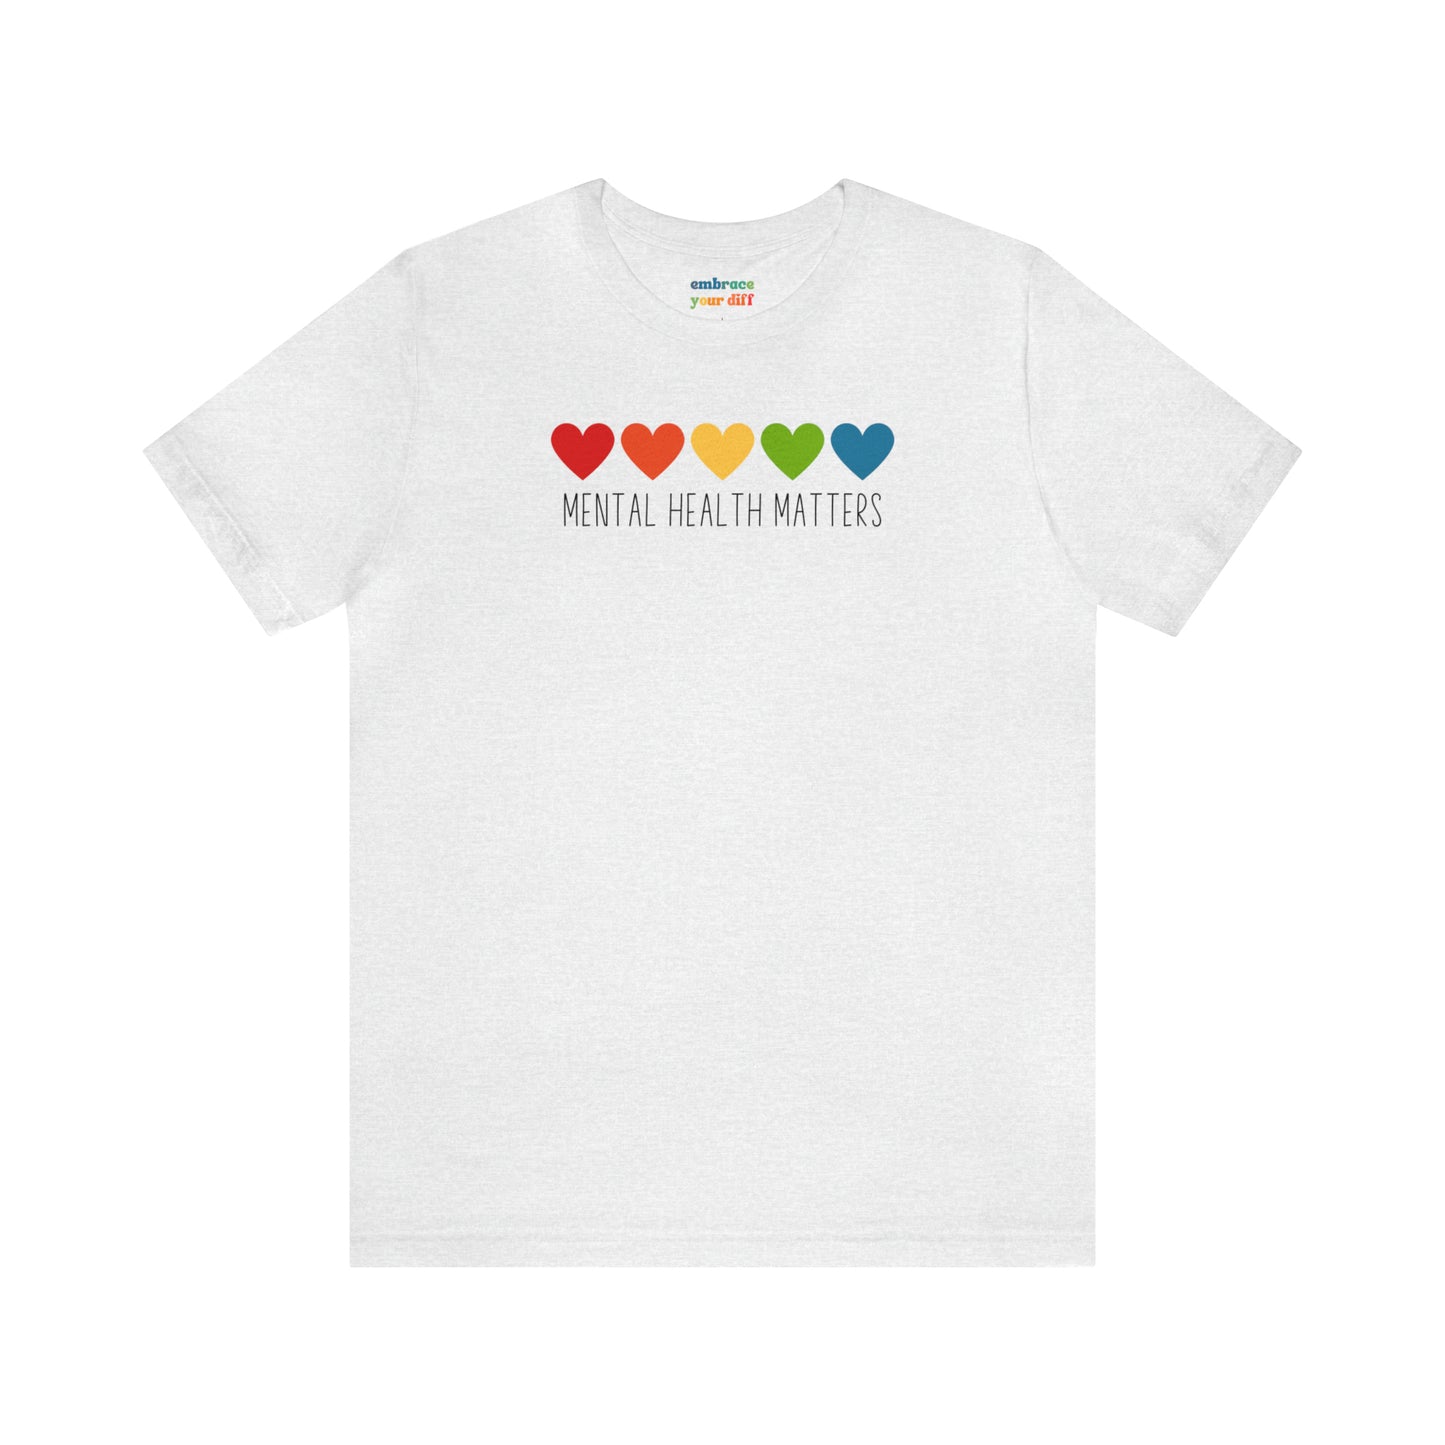 Mental Health Acceptance Unisex Shirt - Inclusivity Tshirt for Adults - Therapist Shirt - Embrace Your Diff